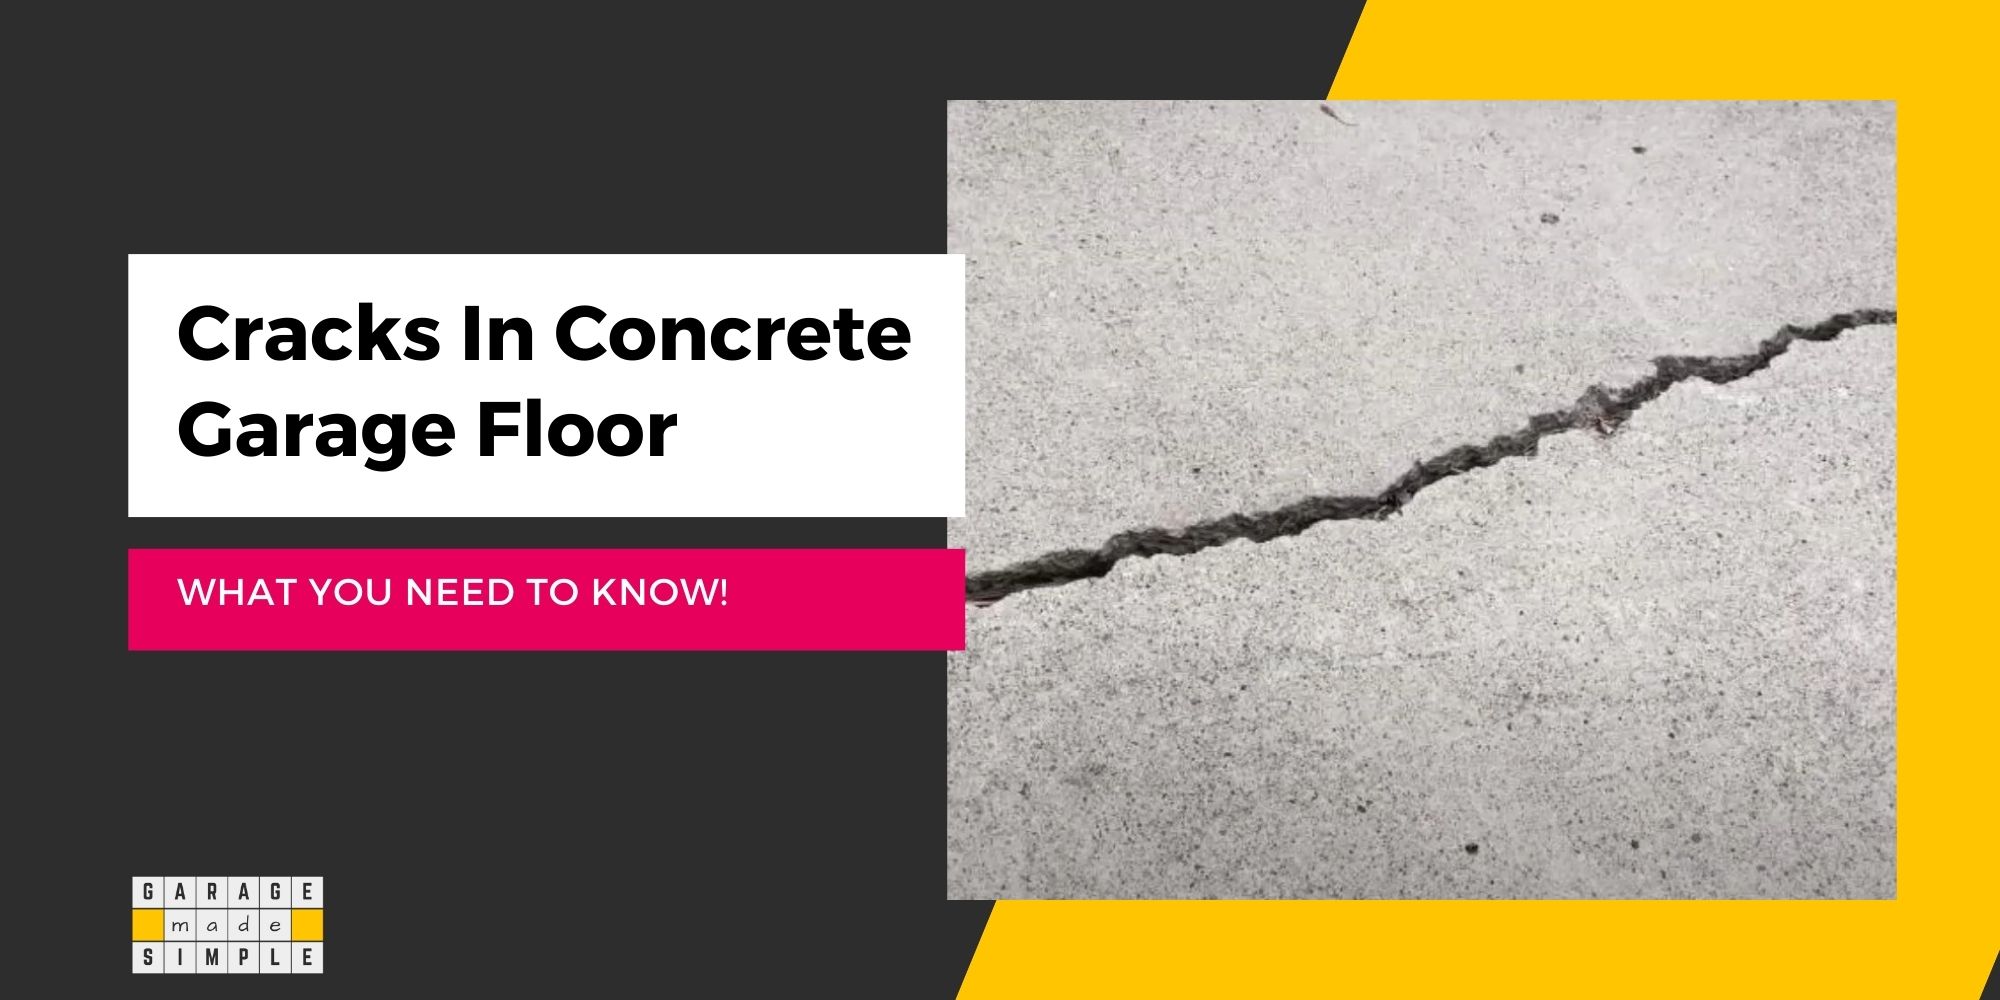 Cracks in Concrete Garage Floor (What You Need To Know!)